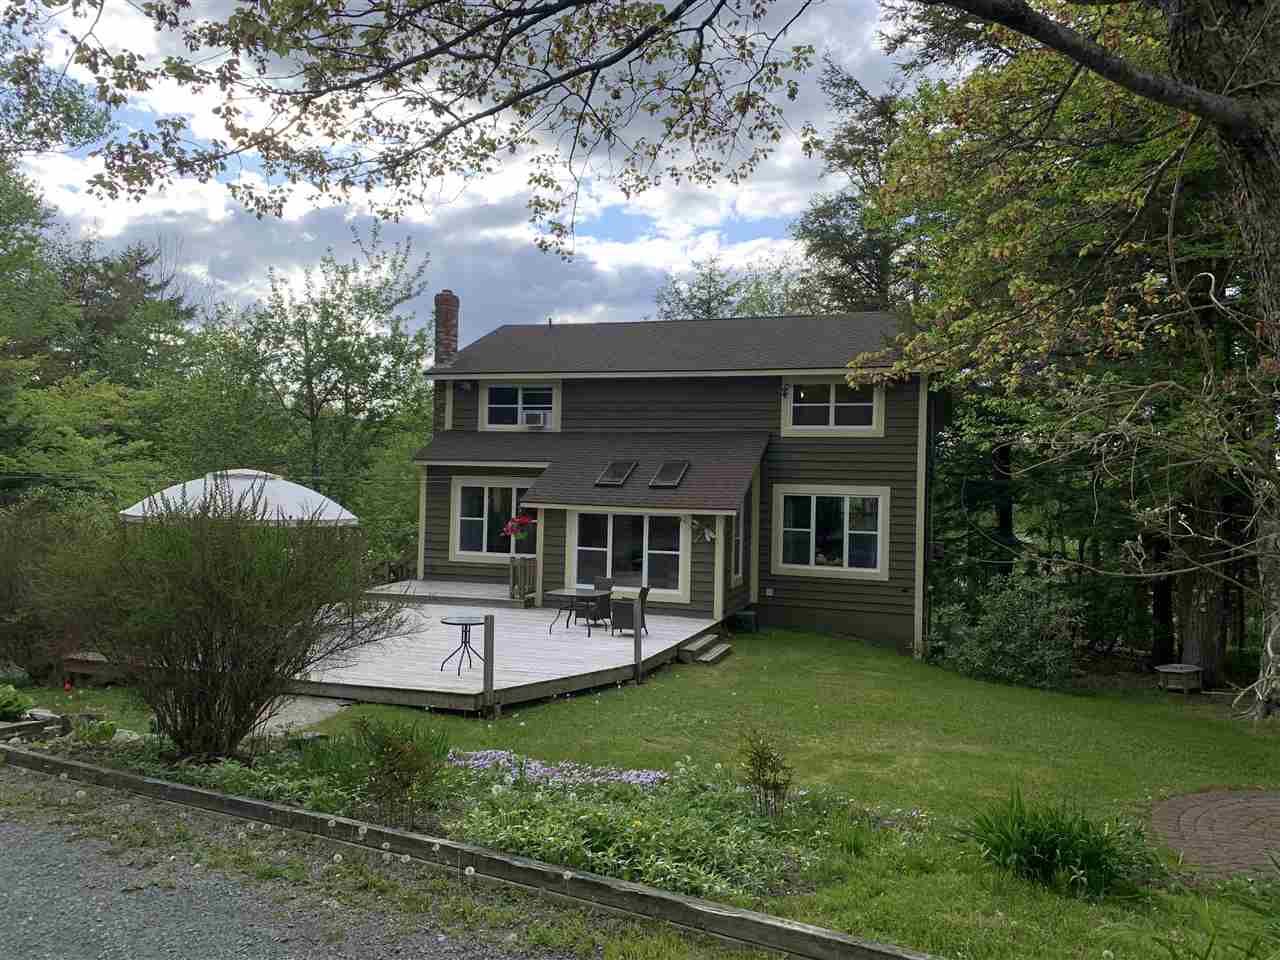 Main Photo: 91 Springfield Lake Road in Middle Sackville: 26-Beaverbank, Upper Sackville Residential for sale (Halifax-Dartmouth)  : MLS®# 202005806